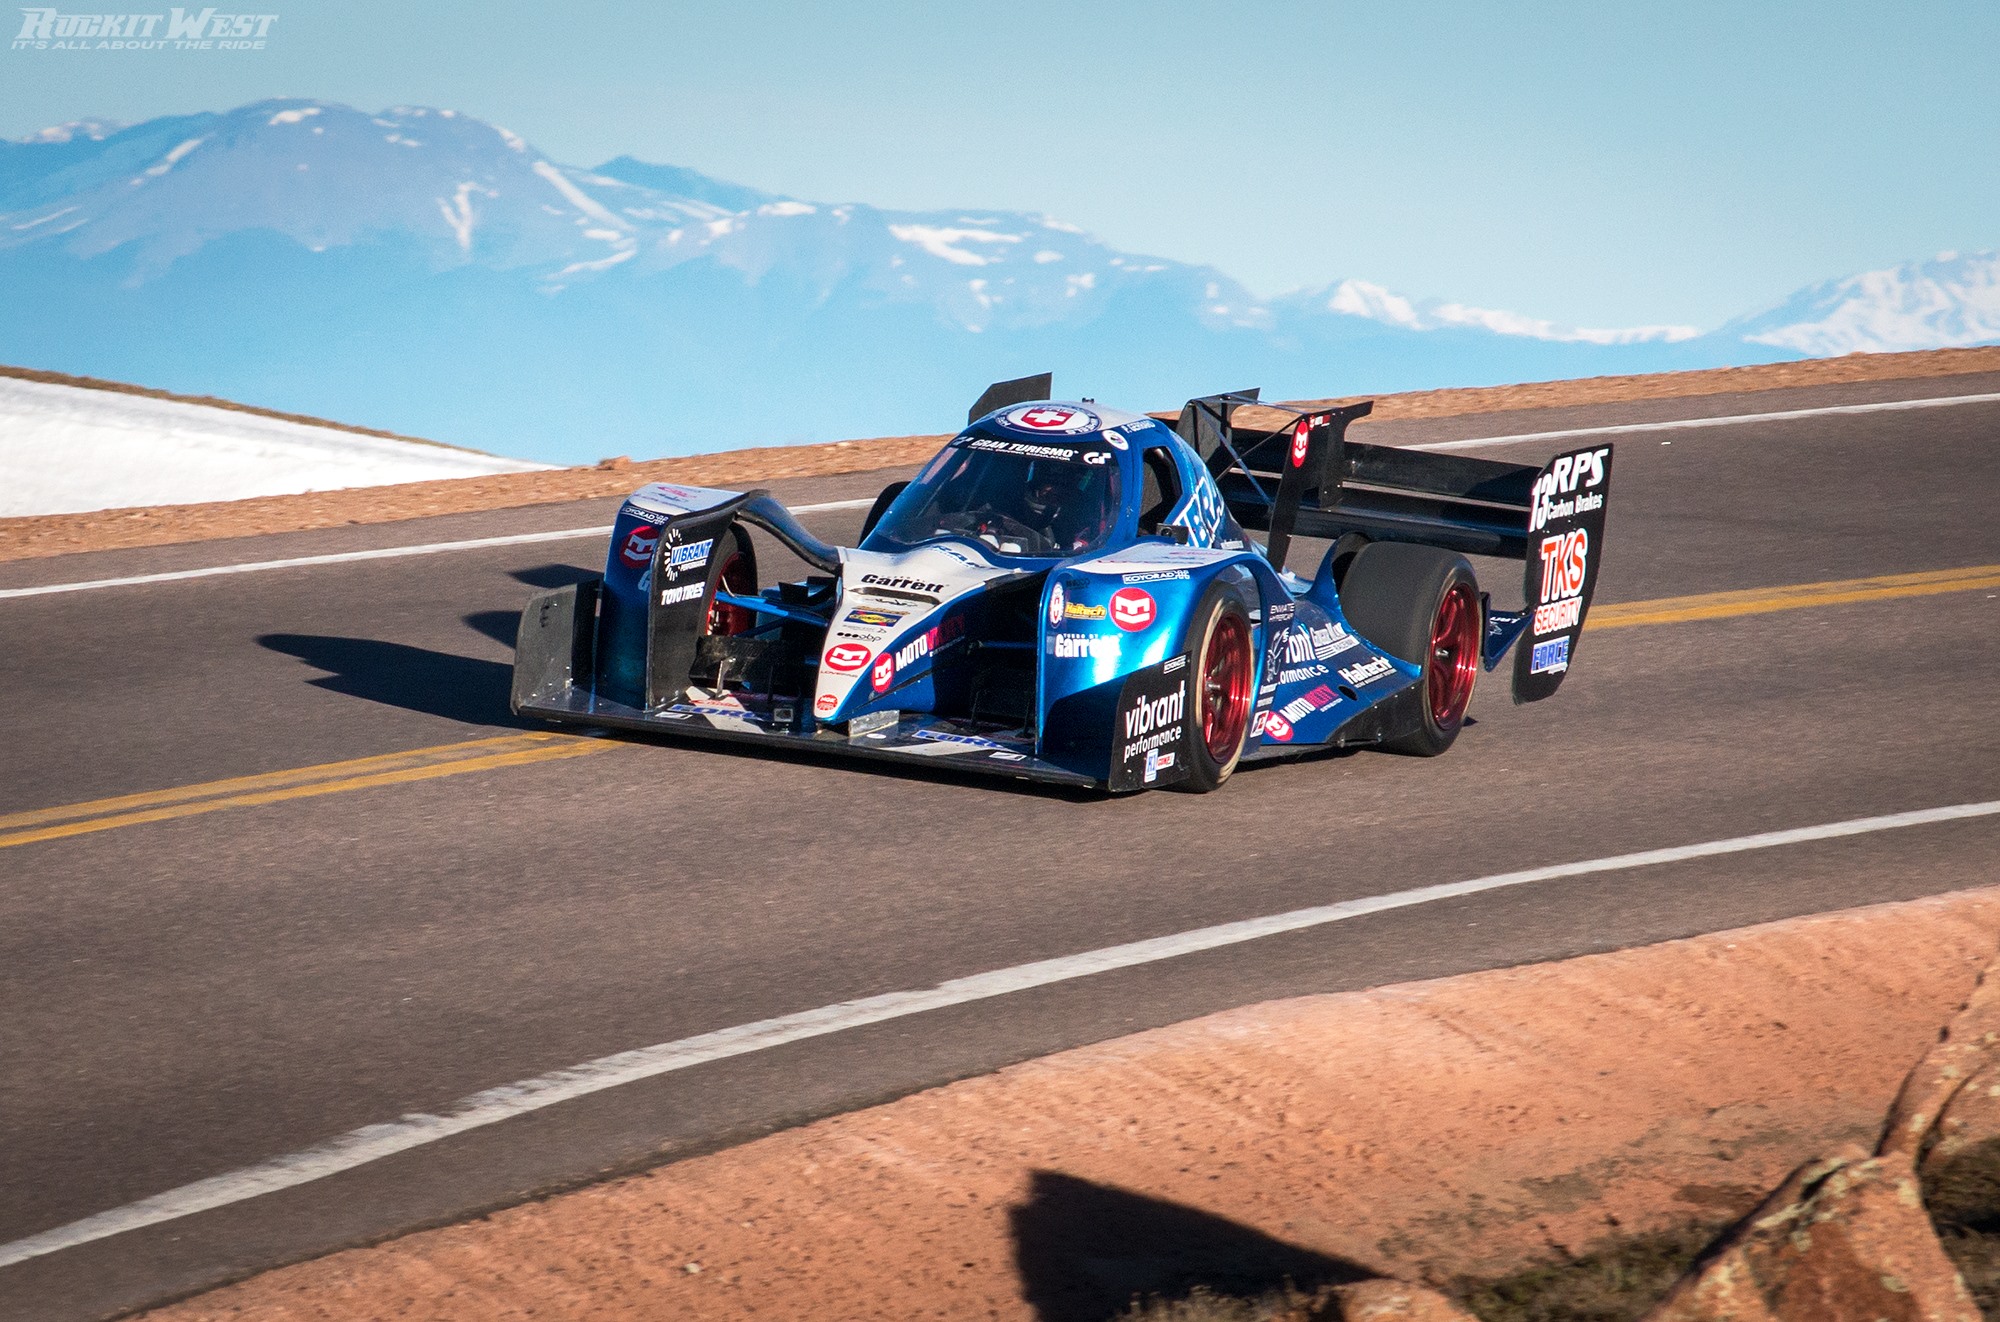 LoveFab and The Enviate Hypercar Finish 2nd in Class in Sunday’s 95th Running of The Broadmoor Pikes Peak International Hill Climb Brought to You by Grand Turismo